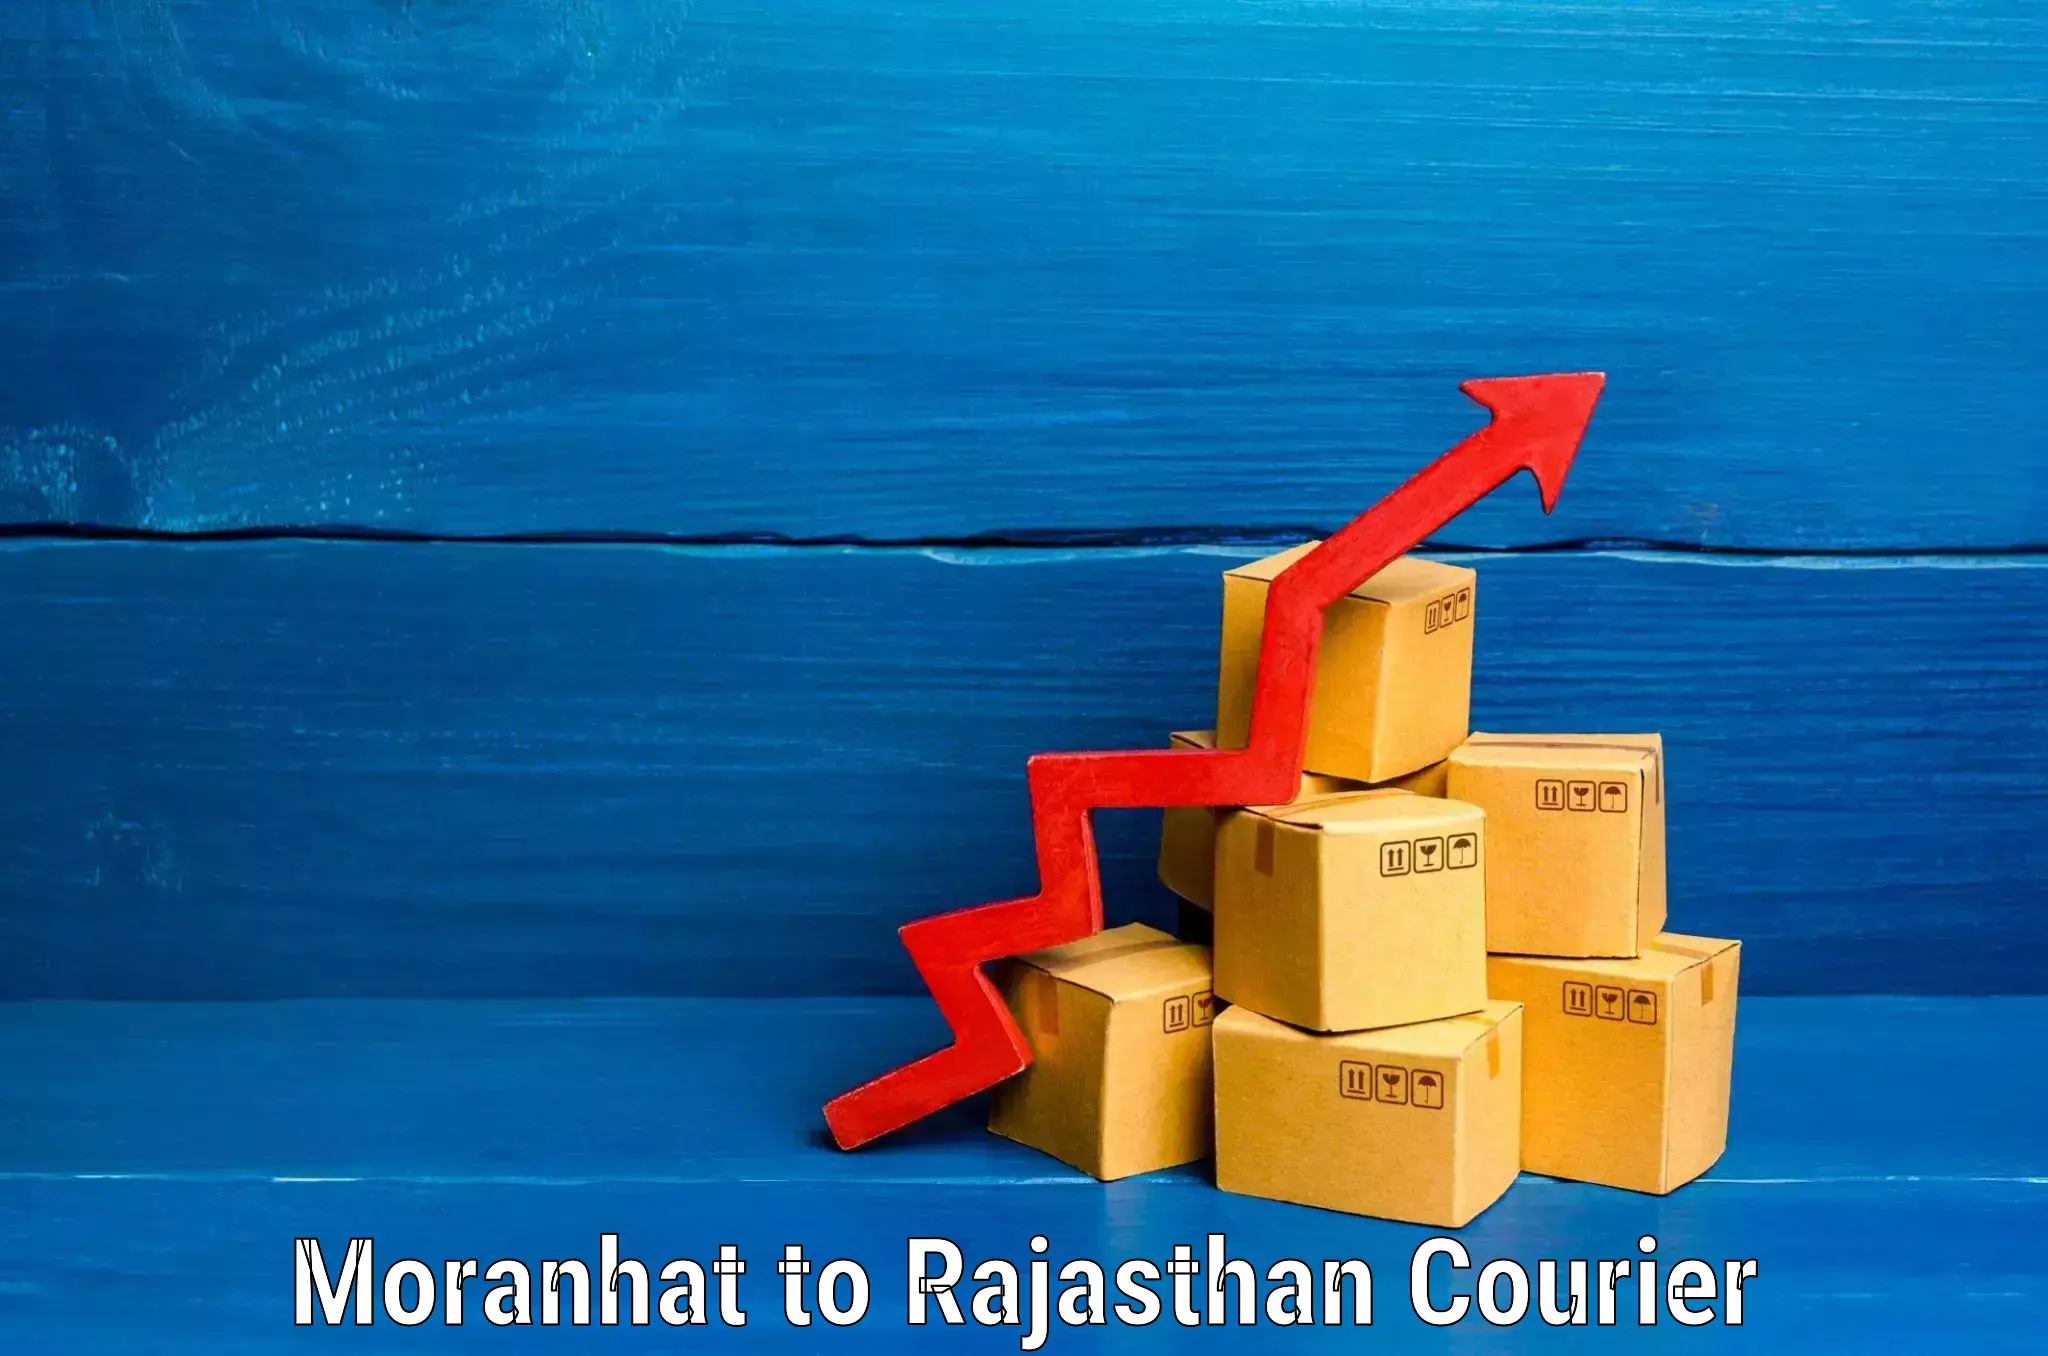 Express luggage delivery Moranhat to Fatehpur Sikar